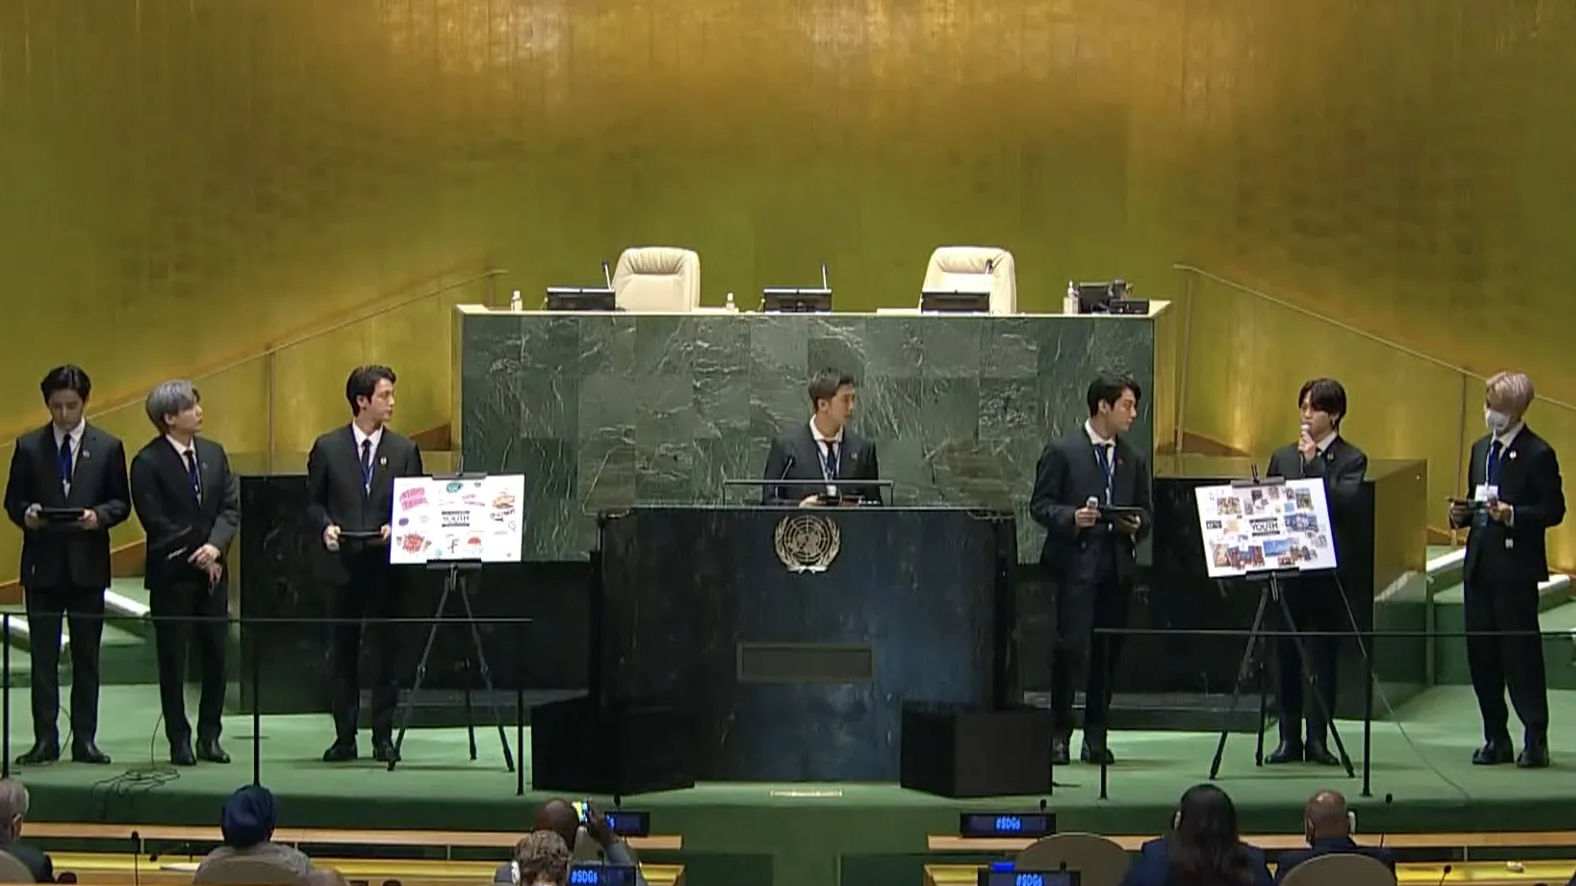 K-Pop band BTS delivers speech at the UN General Assembly